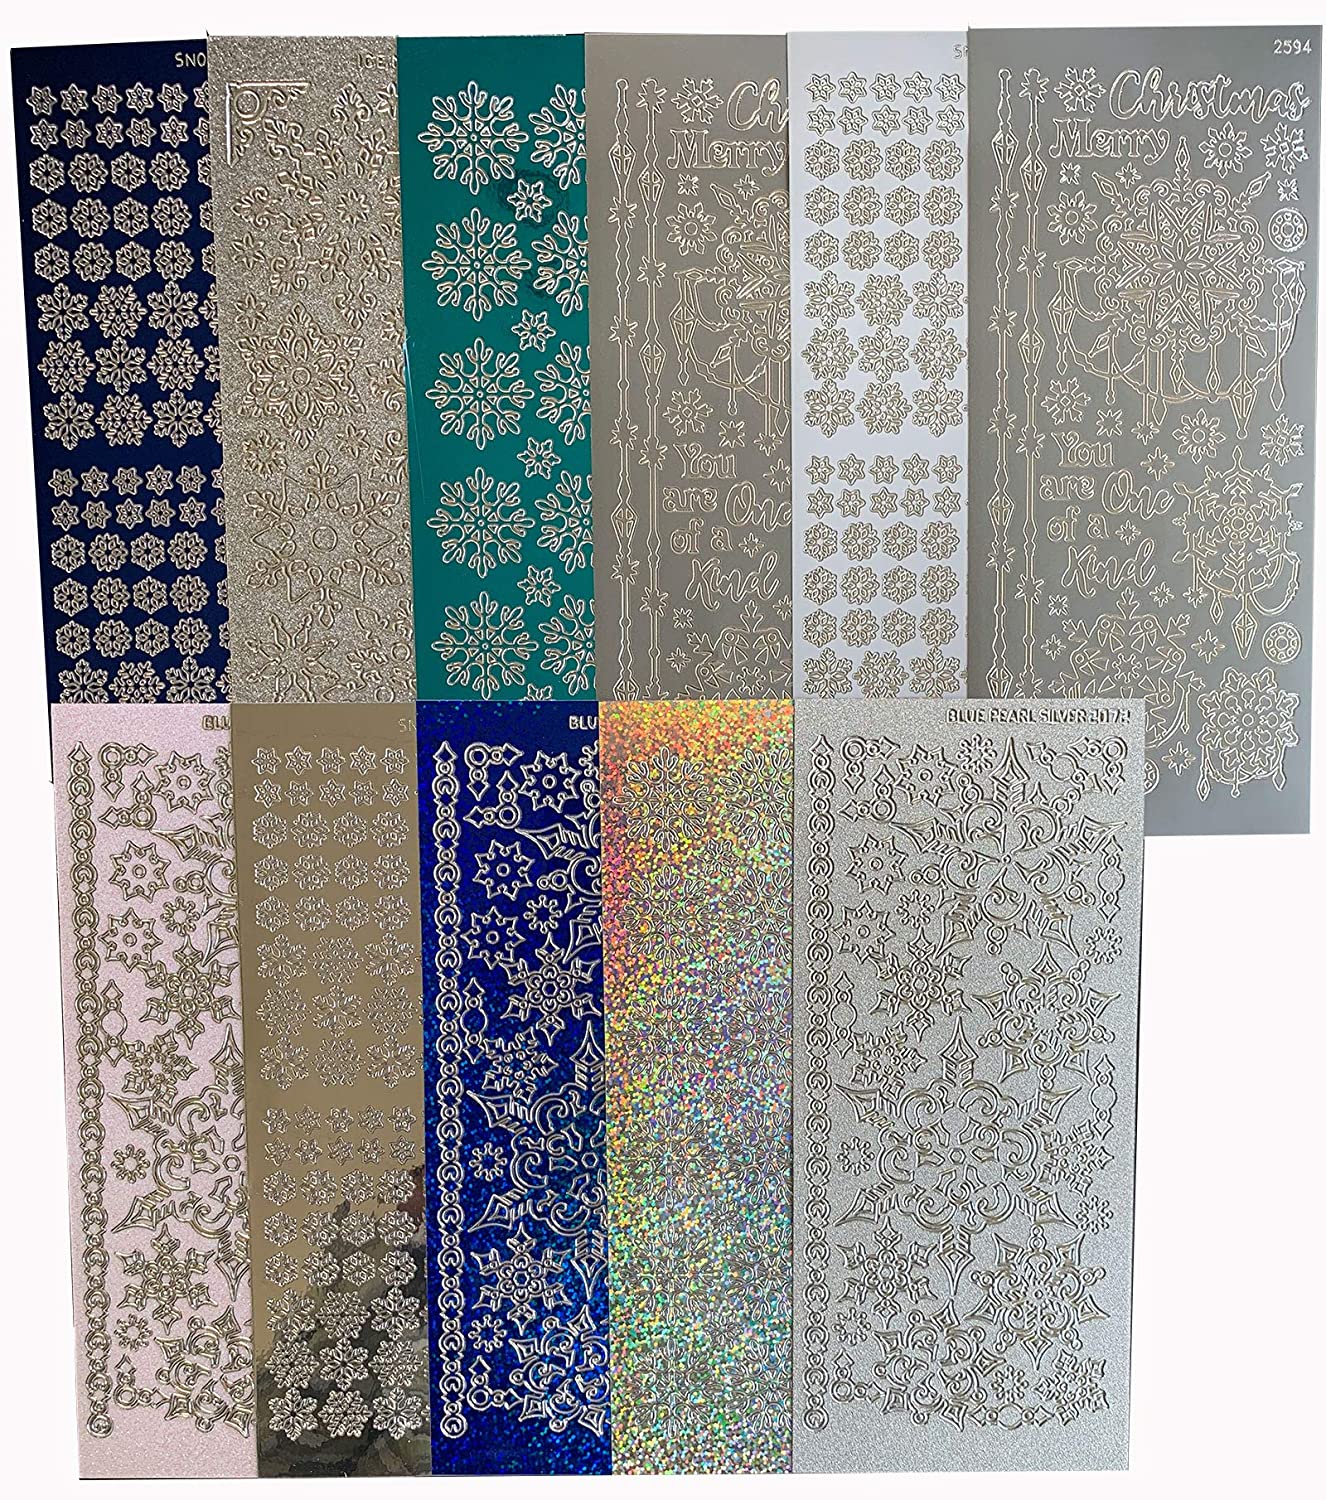 Paper Wishes Dazzles Stickers Collection Unique Stickers for  Scrapbooking, Cardmaking, Gifts and All of Your DIY Crafting, Art and Creative  Projects Inspiration at Your Fingertips